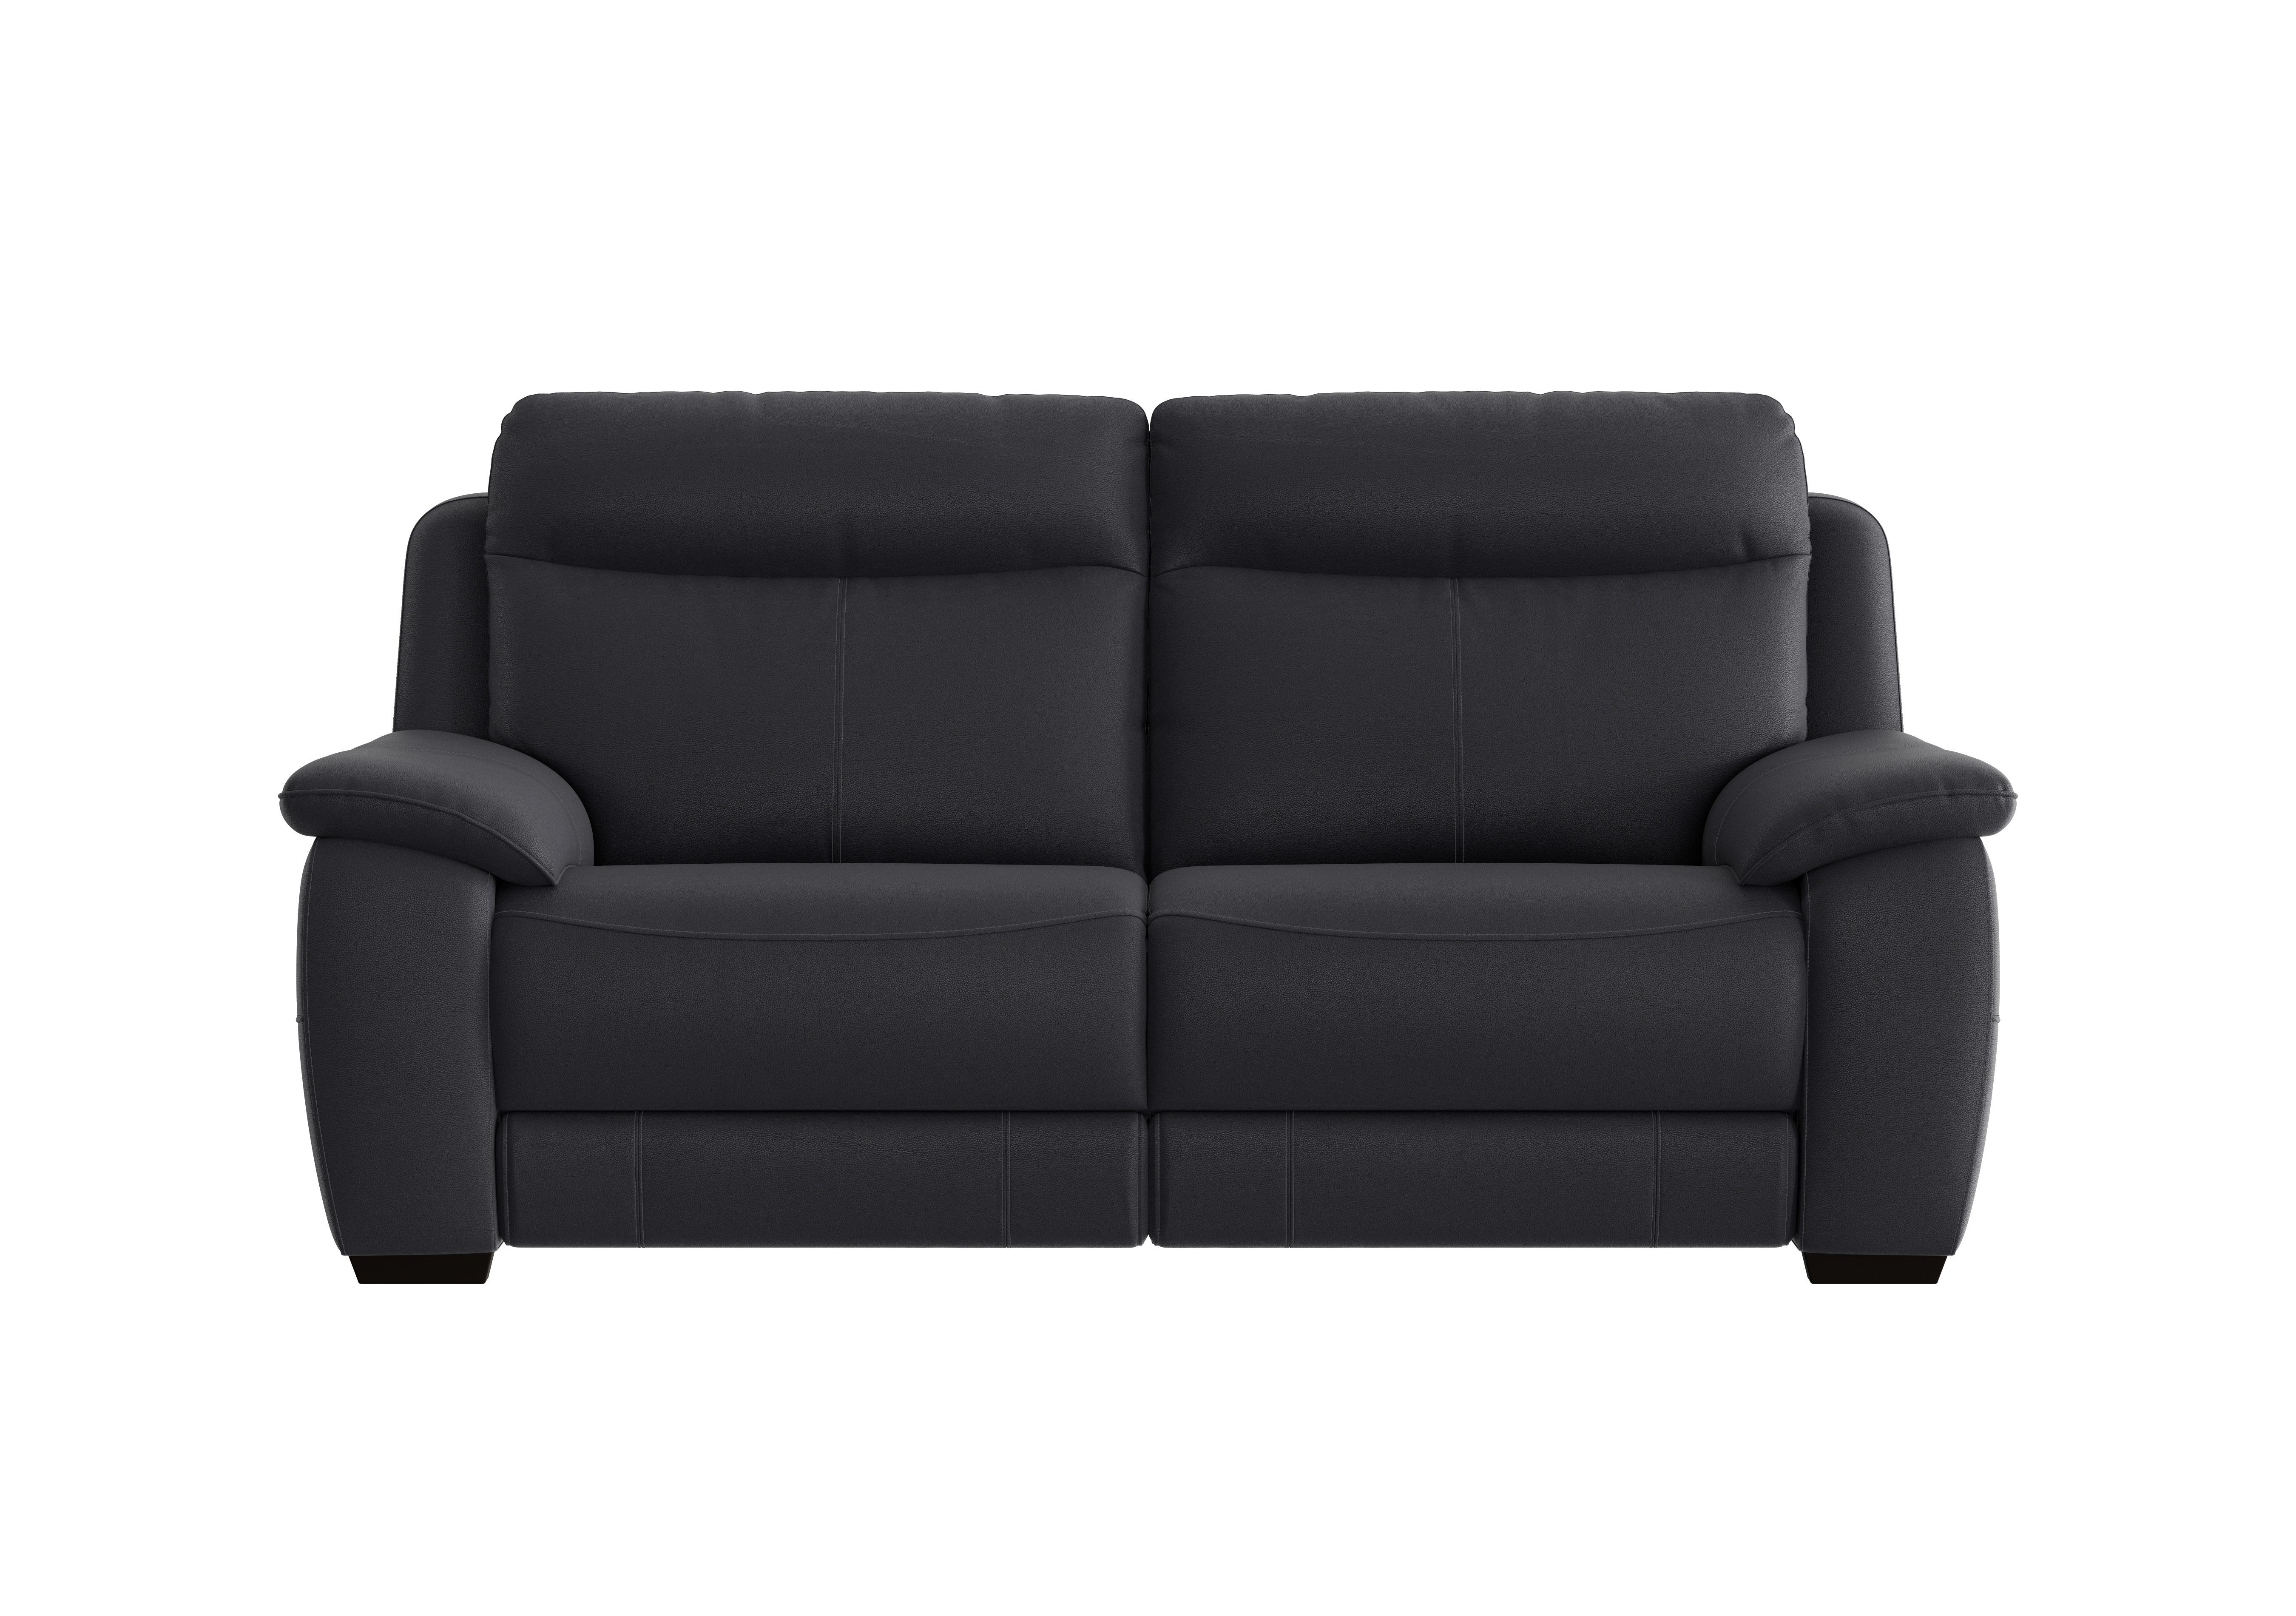 Starlight Express 3 Seater Leather Sofa in Bv-3500 Classic Black on Furniture Village